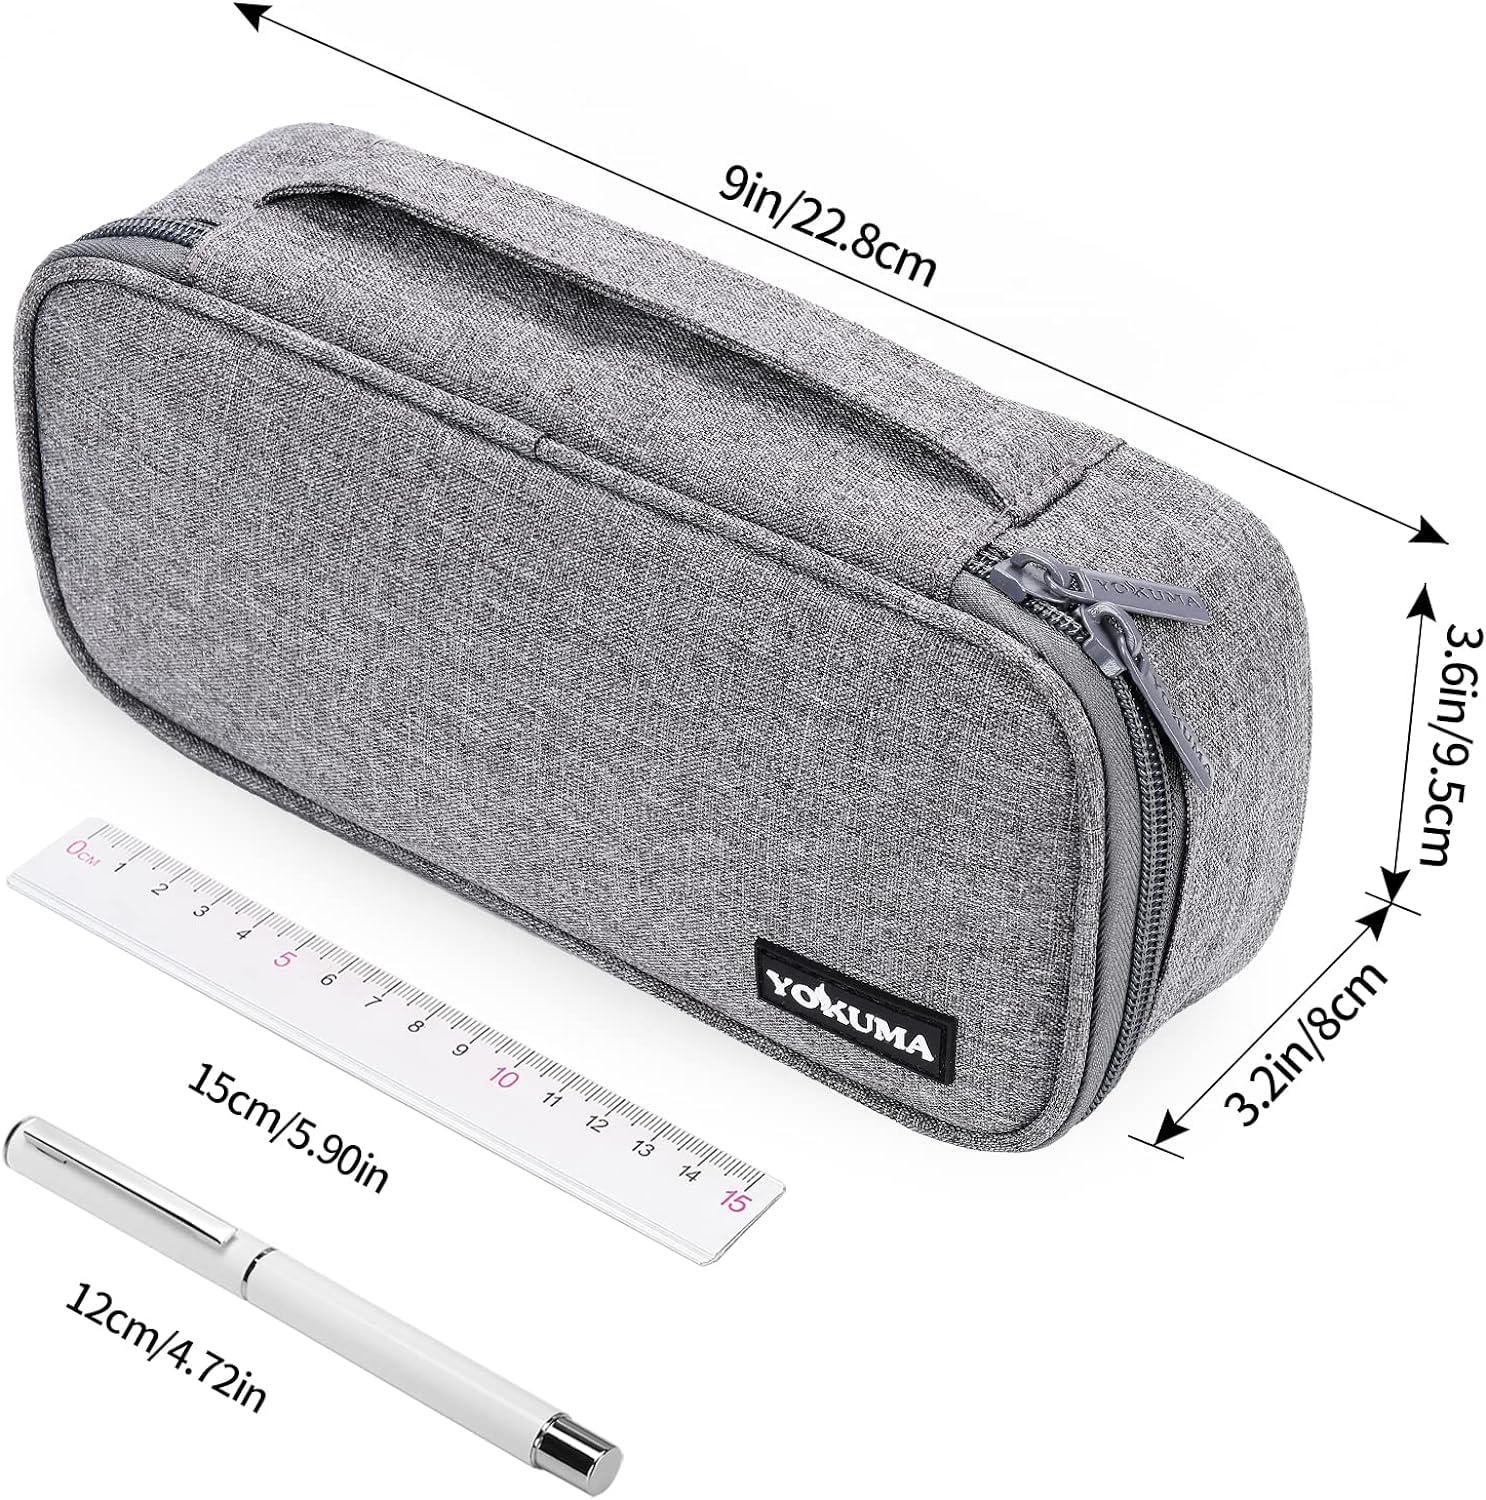 Enyuwlcm Fabric Stationery Stylish Simple Pencil Bag Small Square  Waterproof Pencil Case Black and Gray 2 Pack